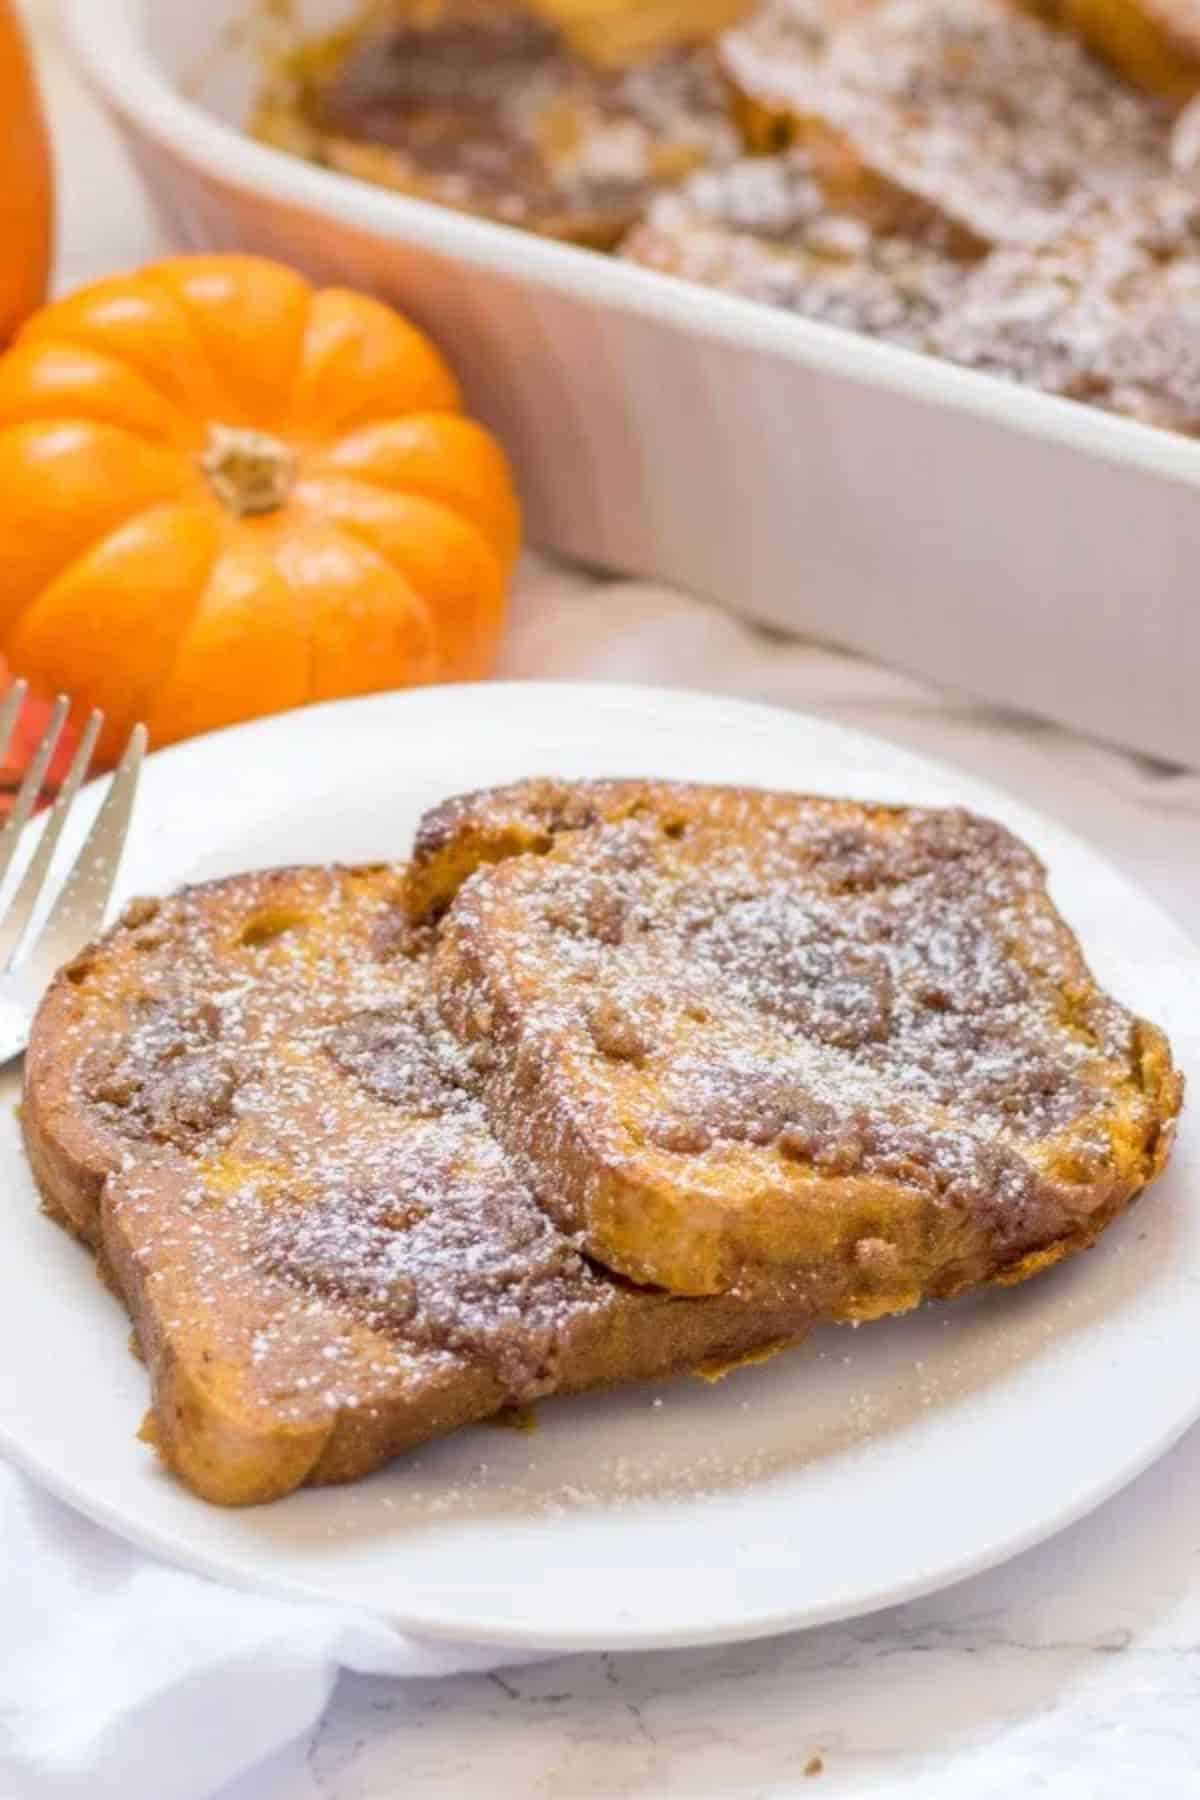 Two Pumpkin Spice French Toasts on a white plate.